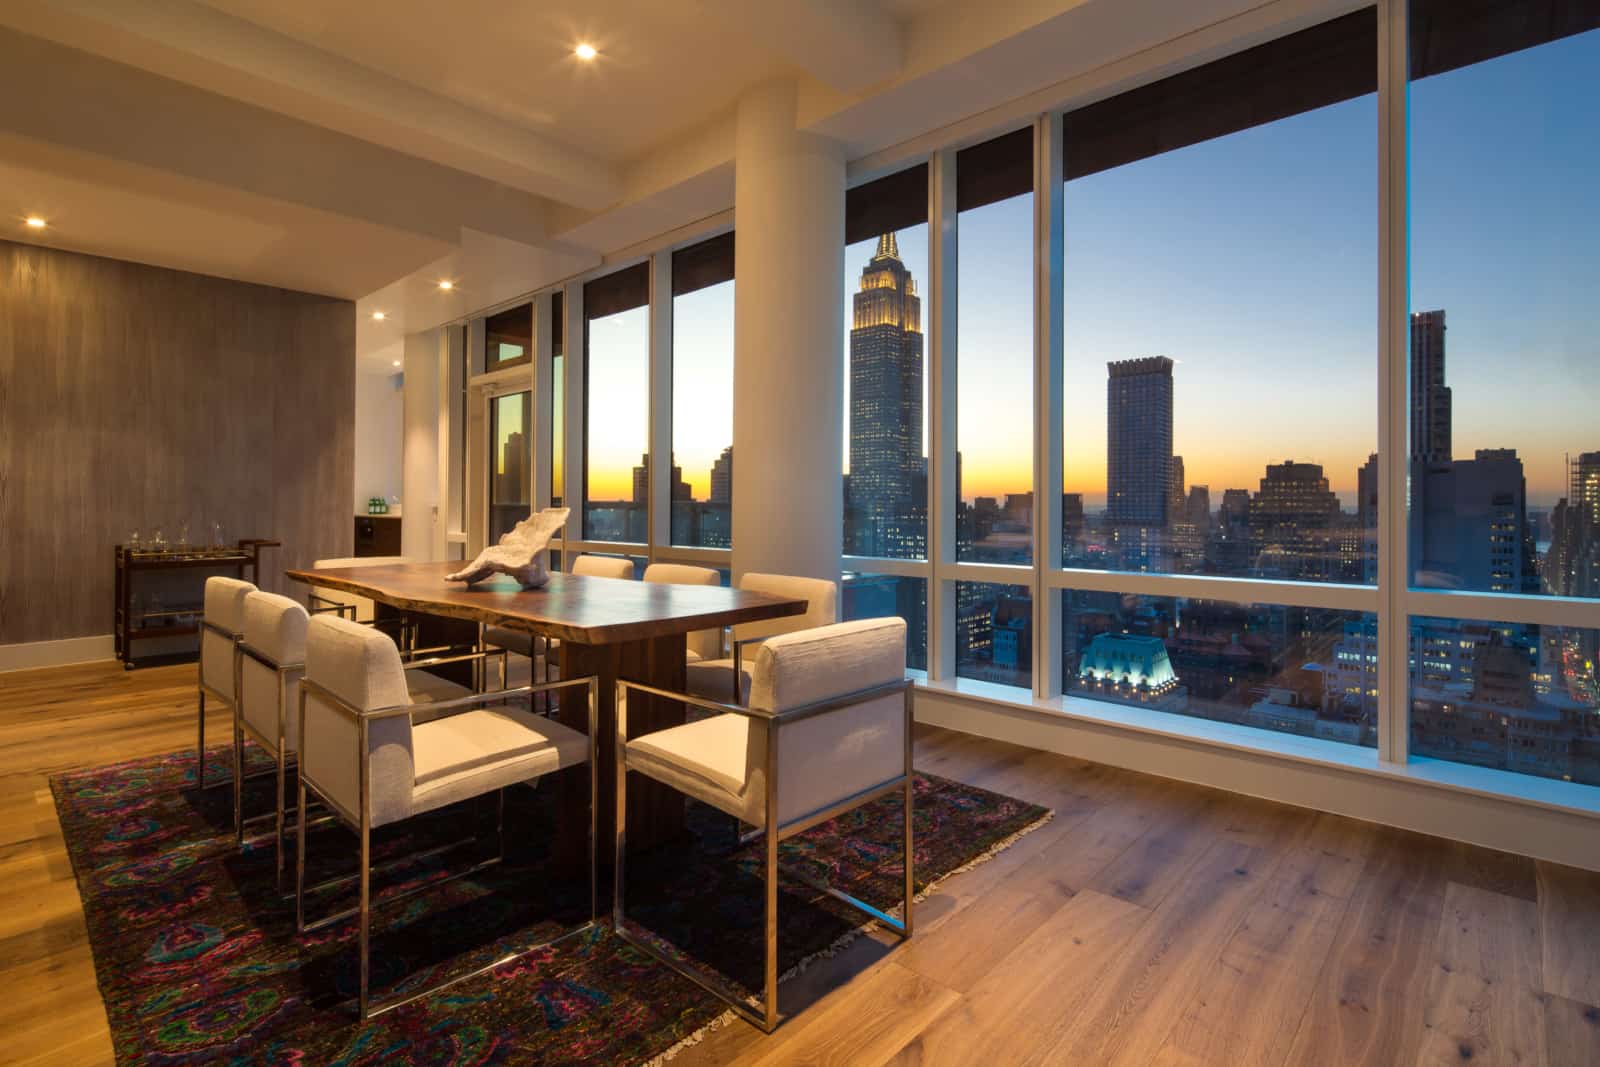 Modern apartment dining room with wall of windows and city views.